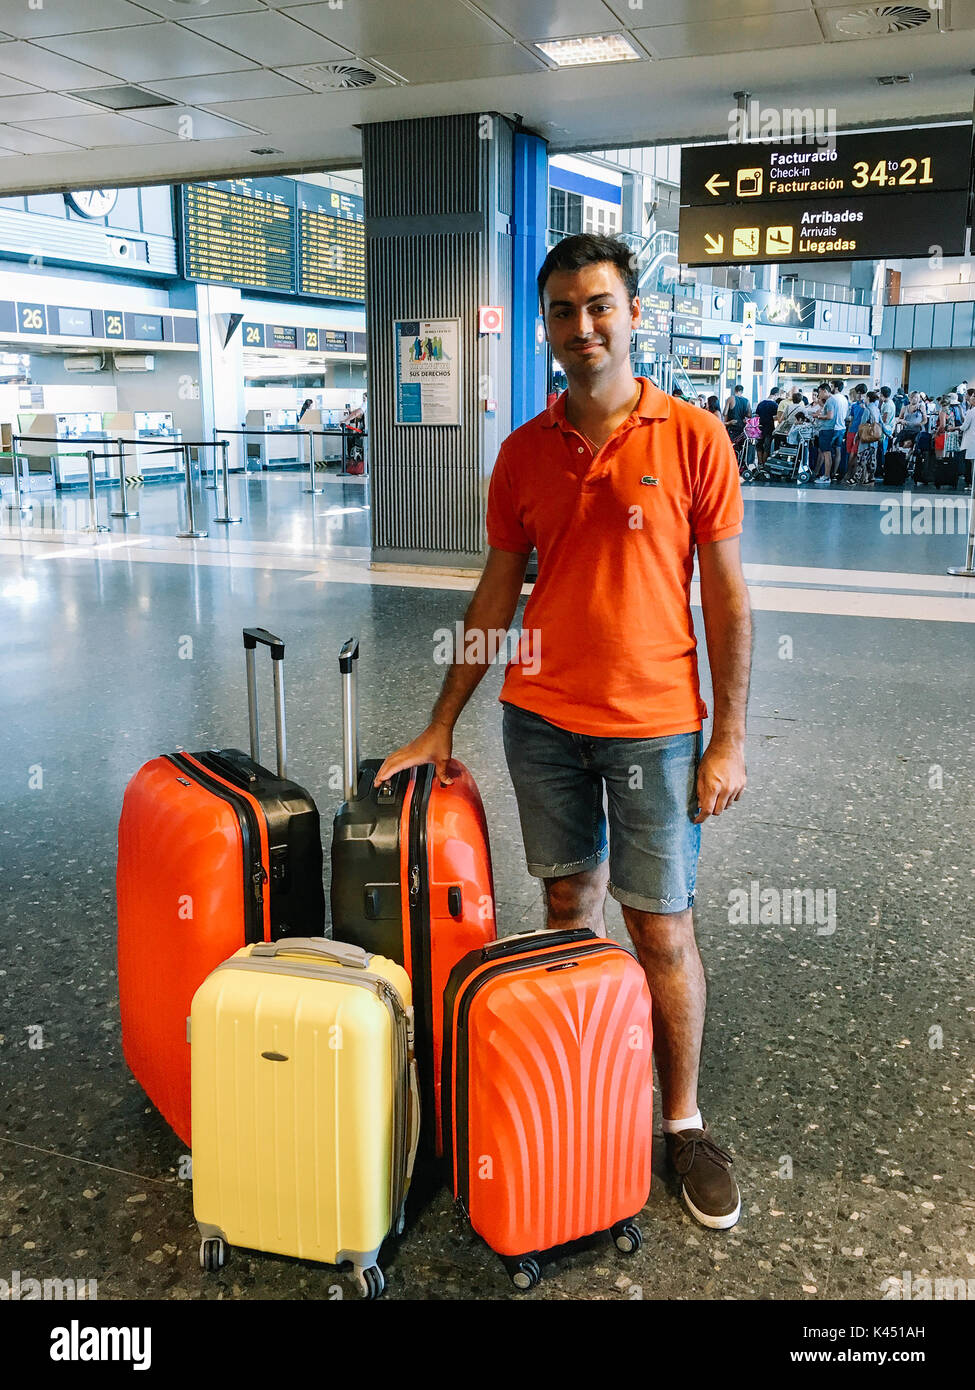 VALENCIA, SPAIN - AUGUST 06, 2016: Man With Many Luggage Bags Is Waiting For Airplane In Airport Terminal. Stock Photo